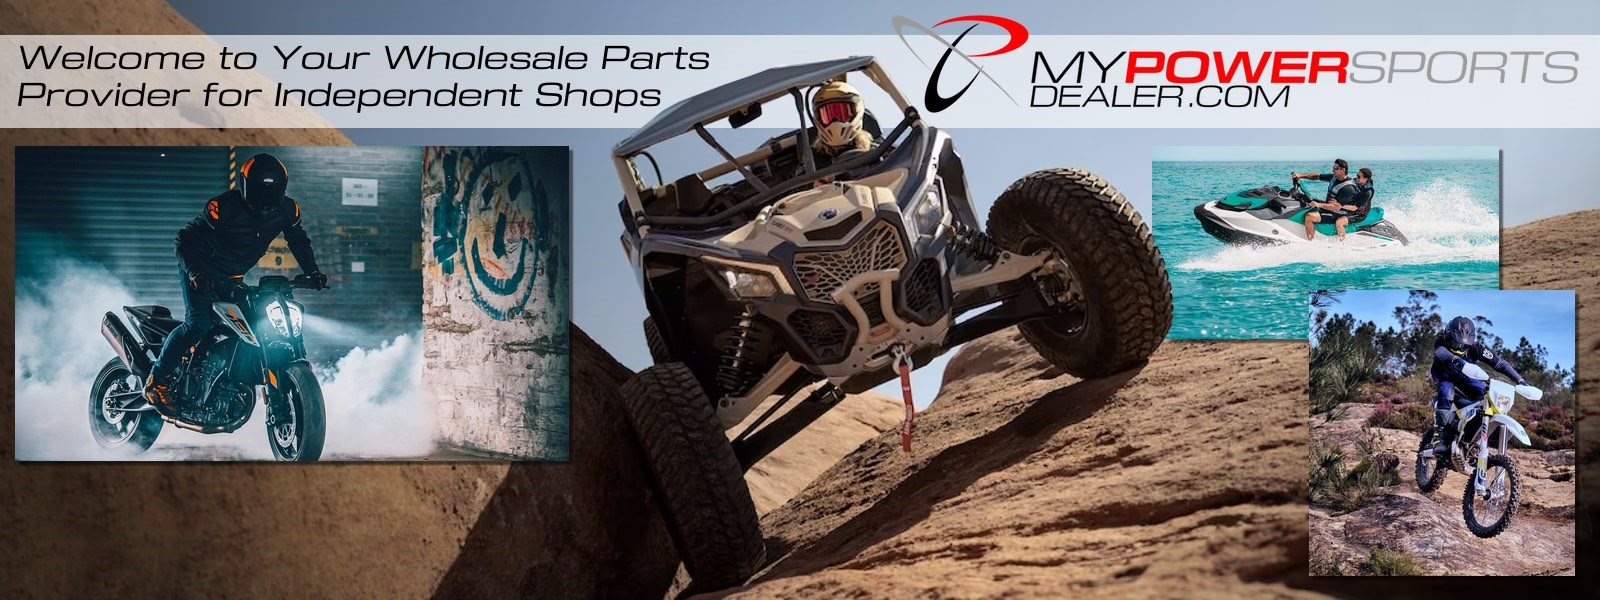 Welcome to MyPowerSportsDealer - Your Wholesale Parts Provider for Independent Shops